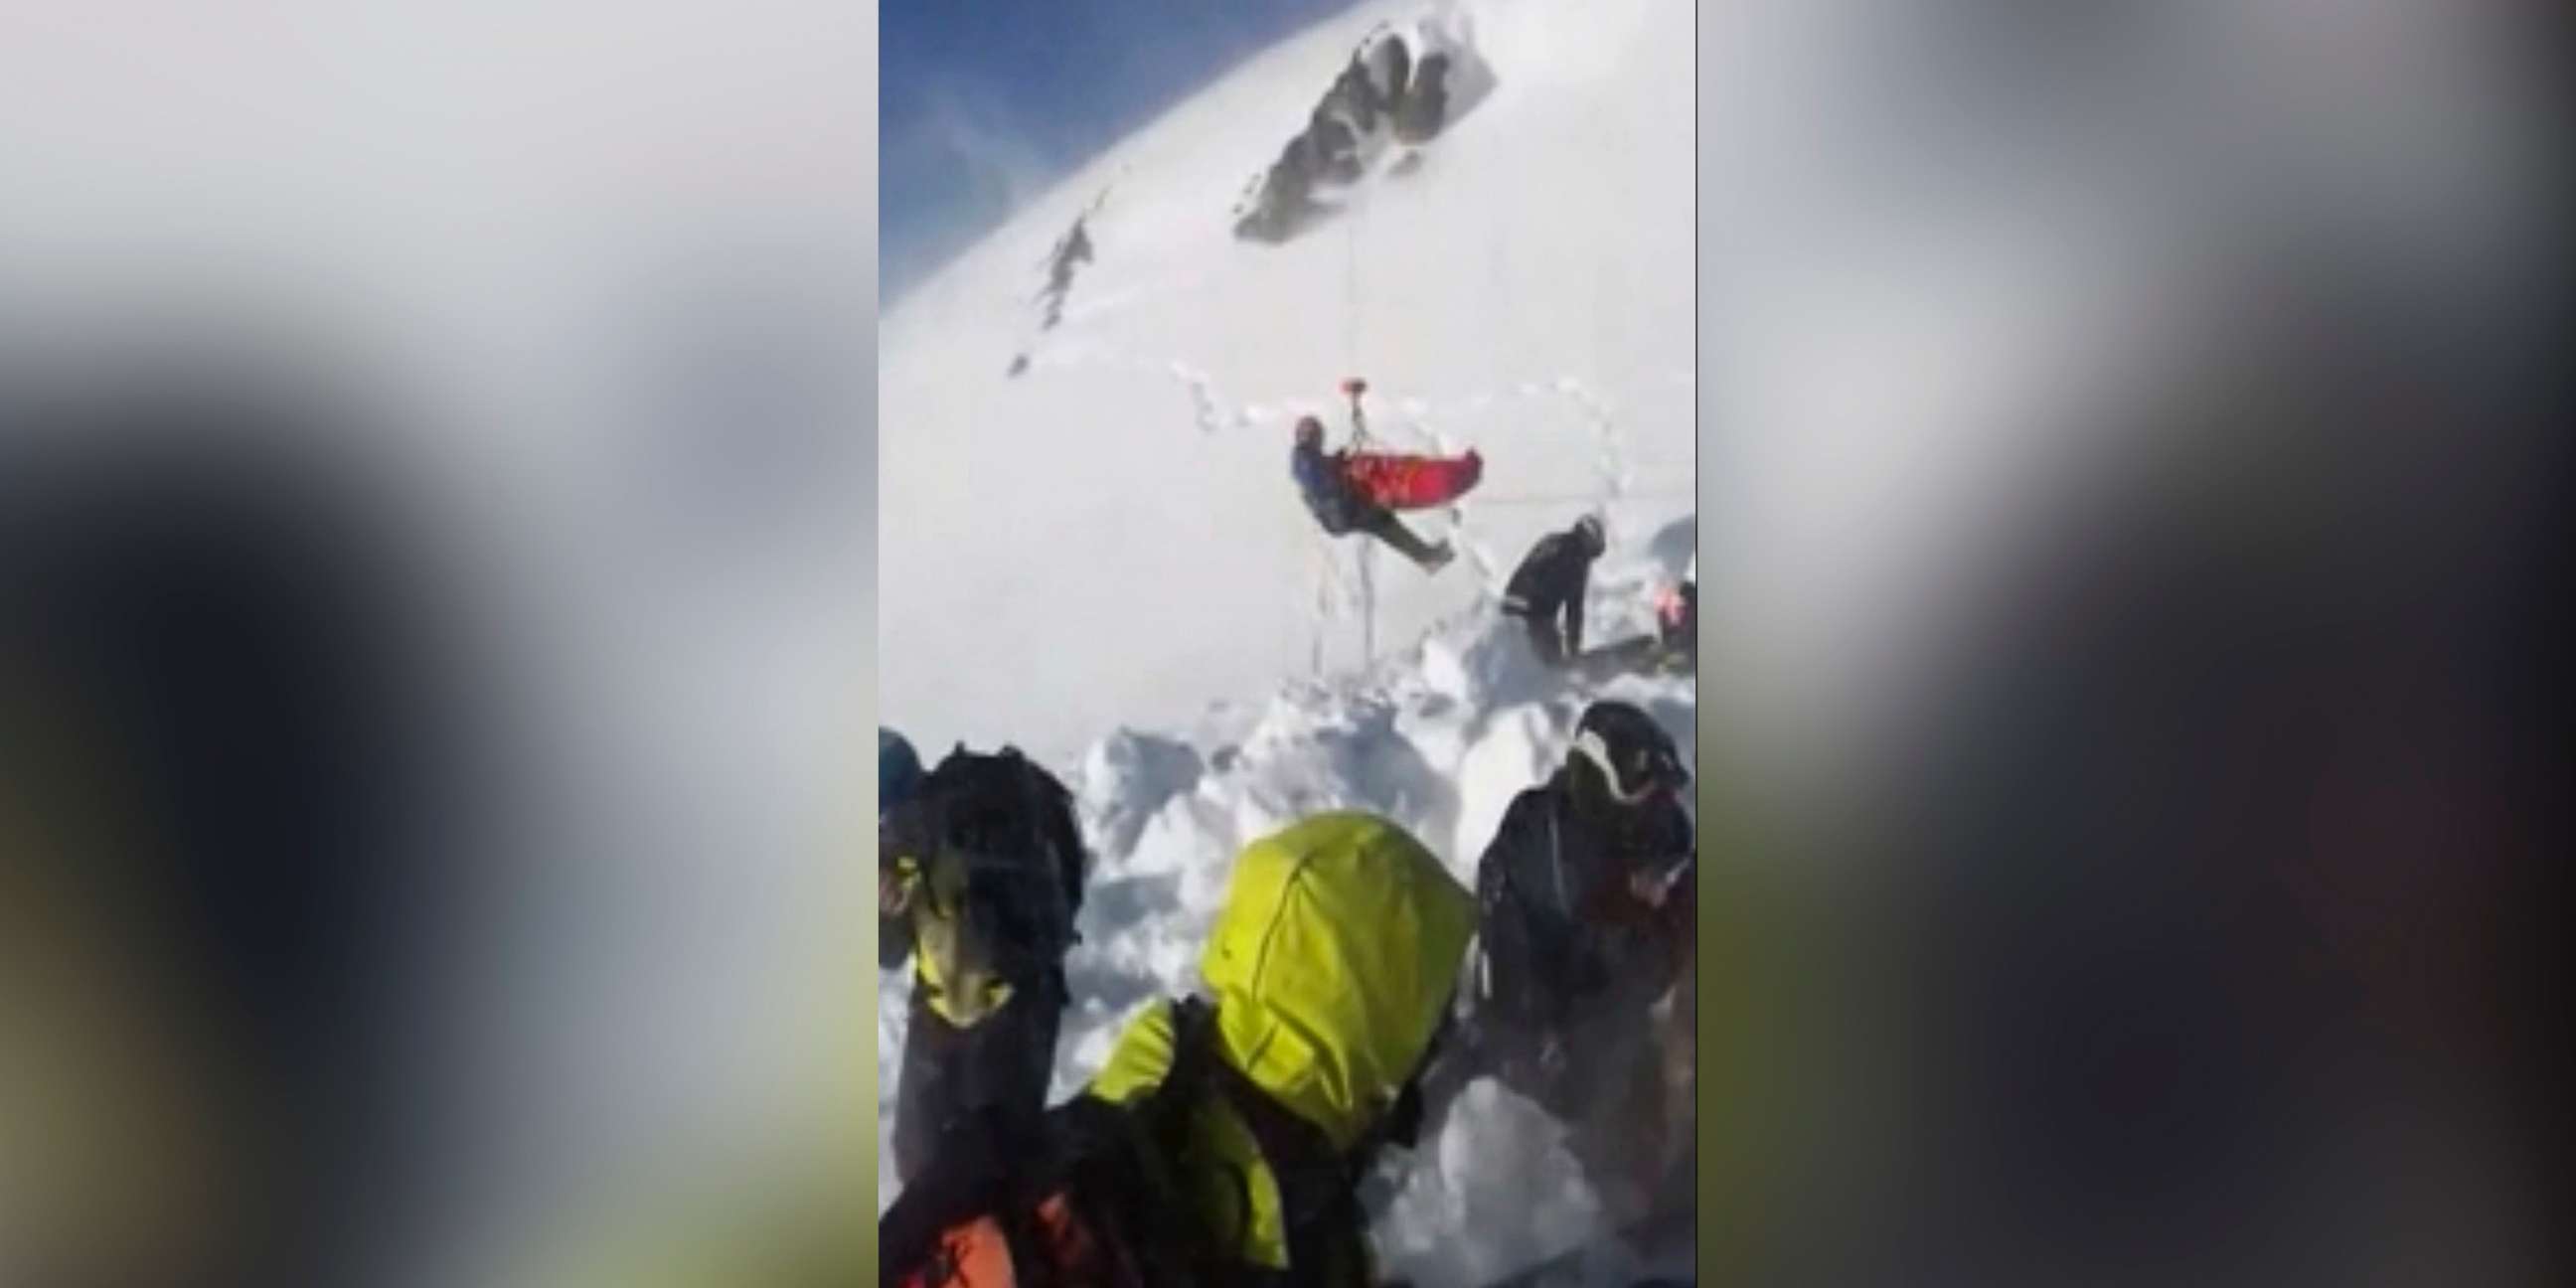 PHOTO: A boy is airlifted after an avalanche on the French Alps, Dec. 26, 2018, in a image from a video. A 12-year-old boy was found alive and uninjured after being buried for 40 minutes, an event his rescuers are calling a true "miracle."